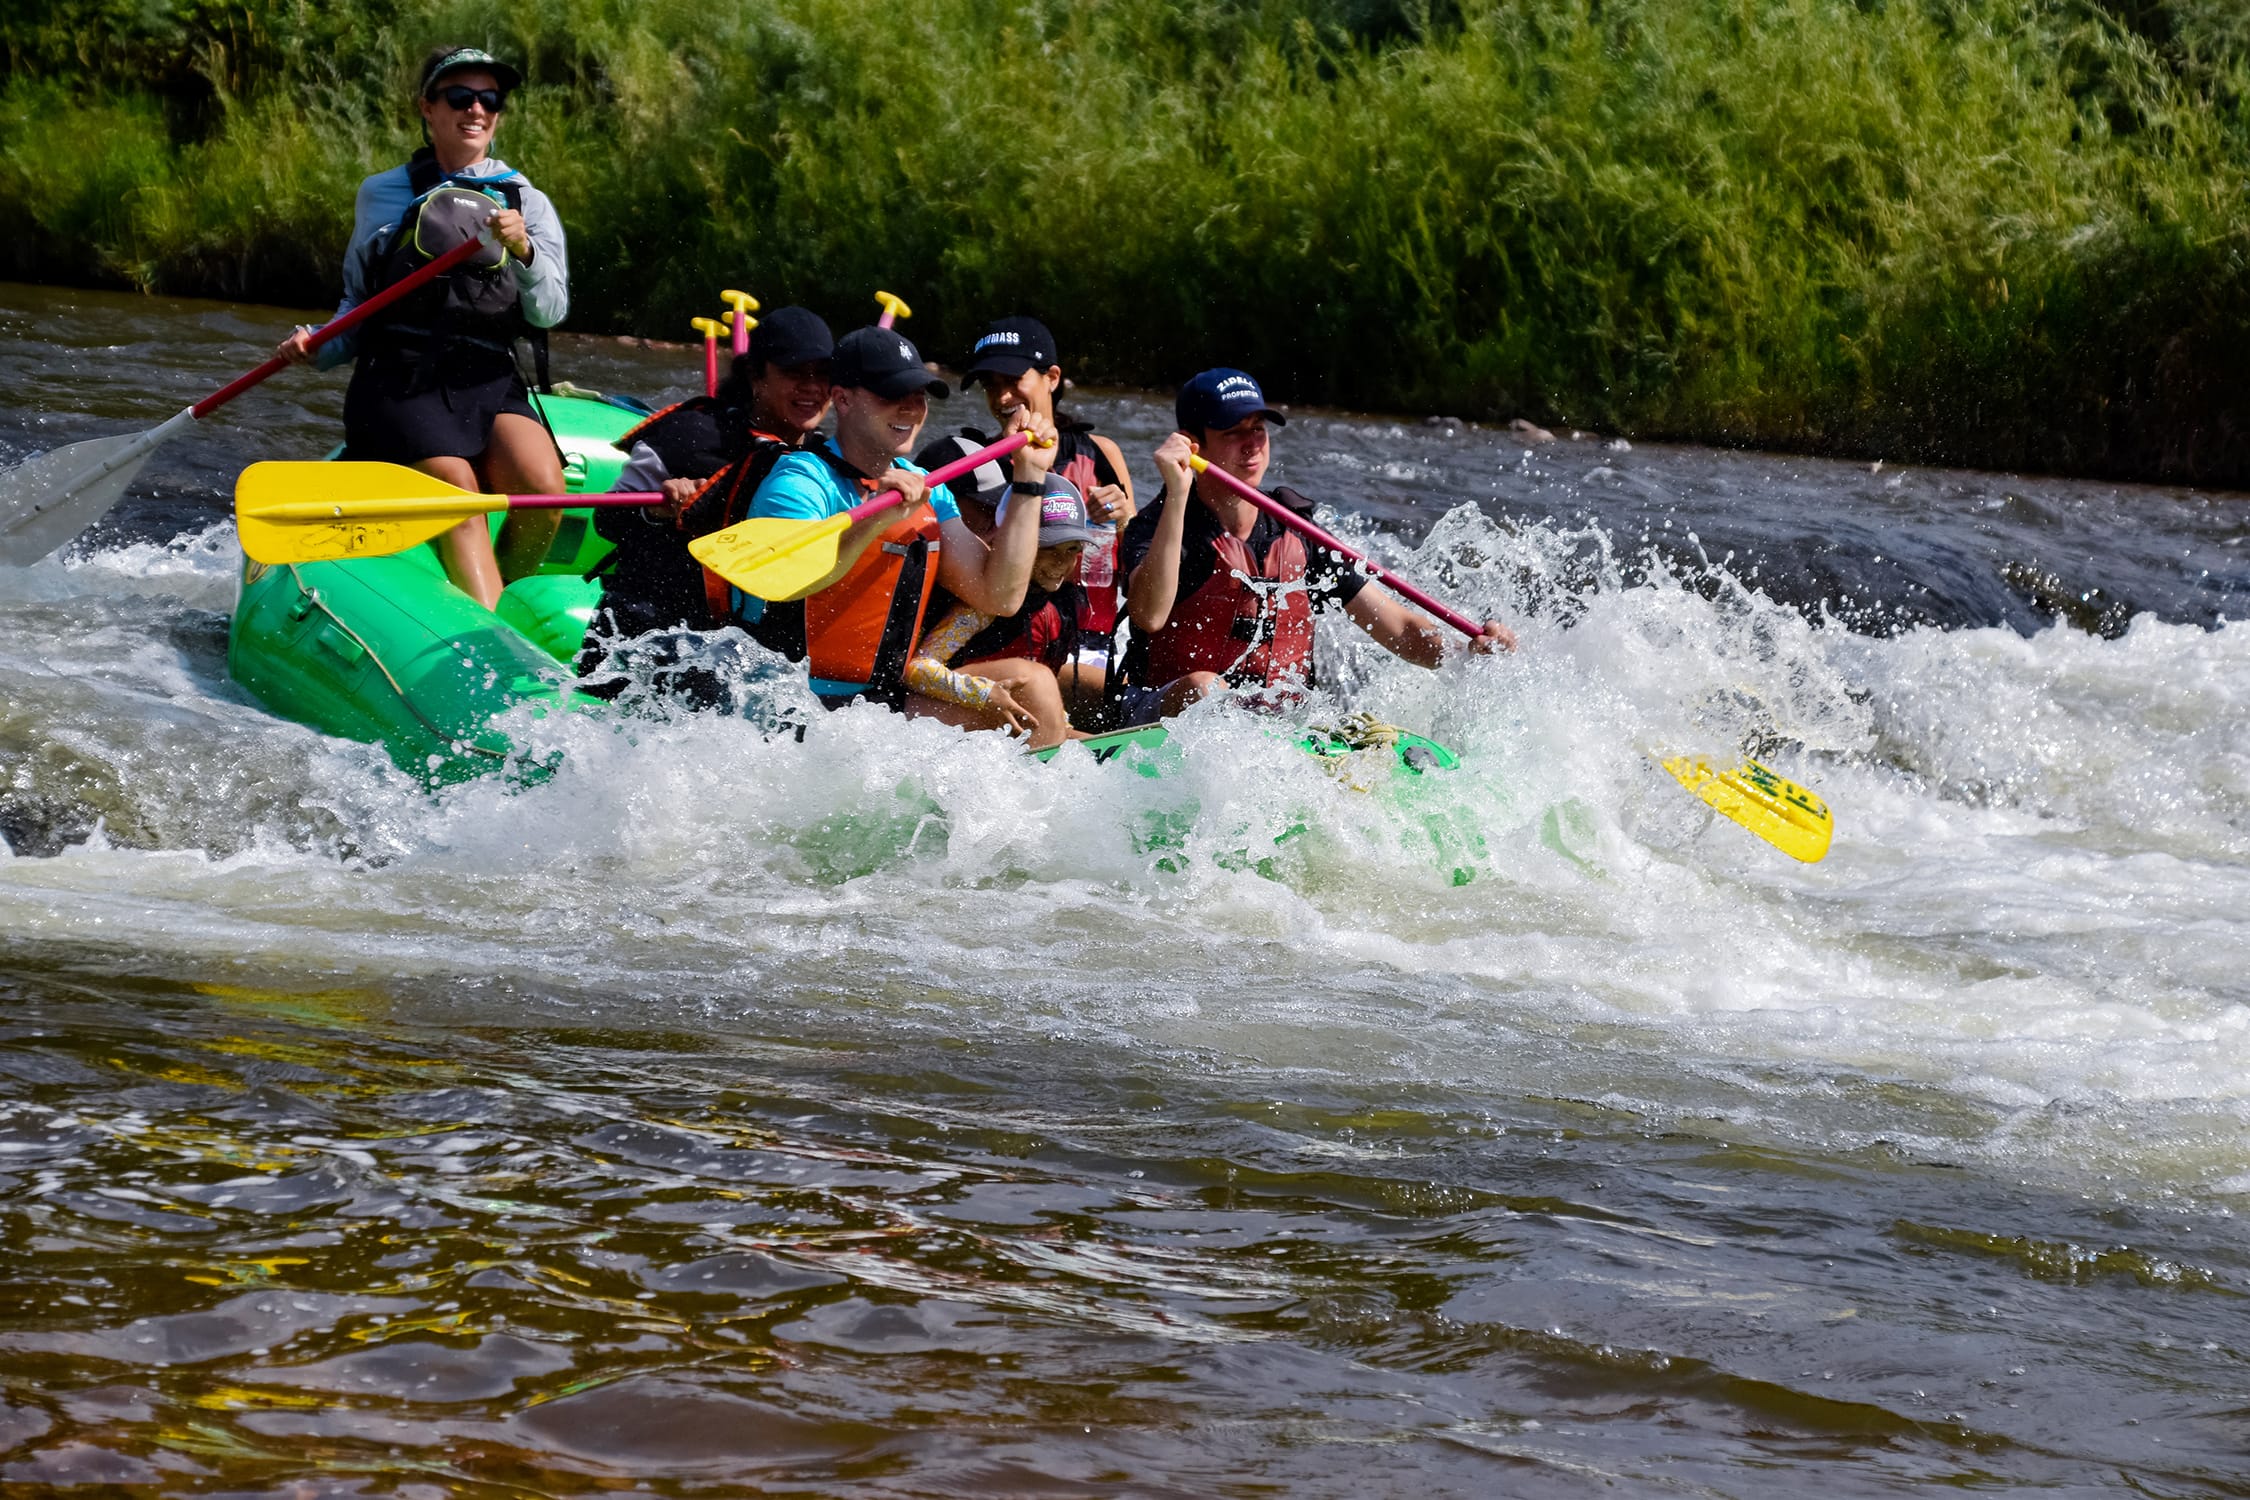 group whitewater rafting the upper roaring fork river in Colorado